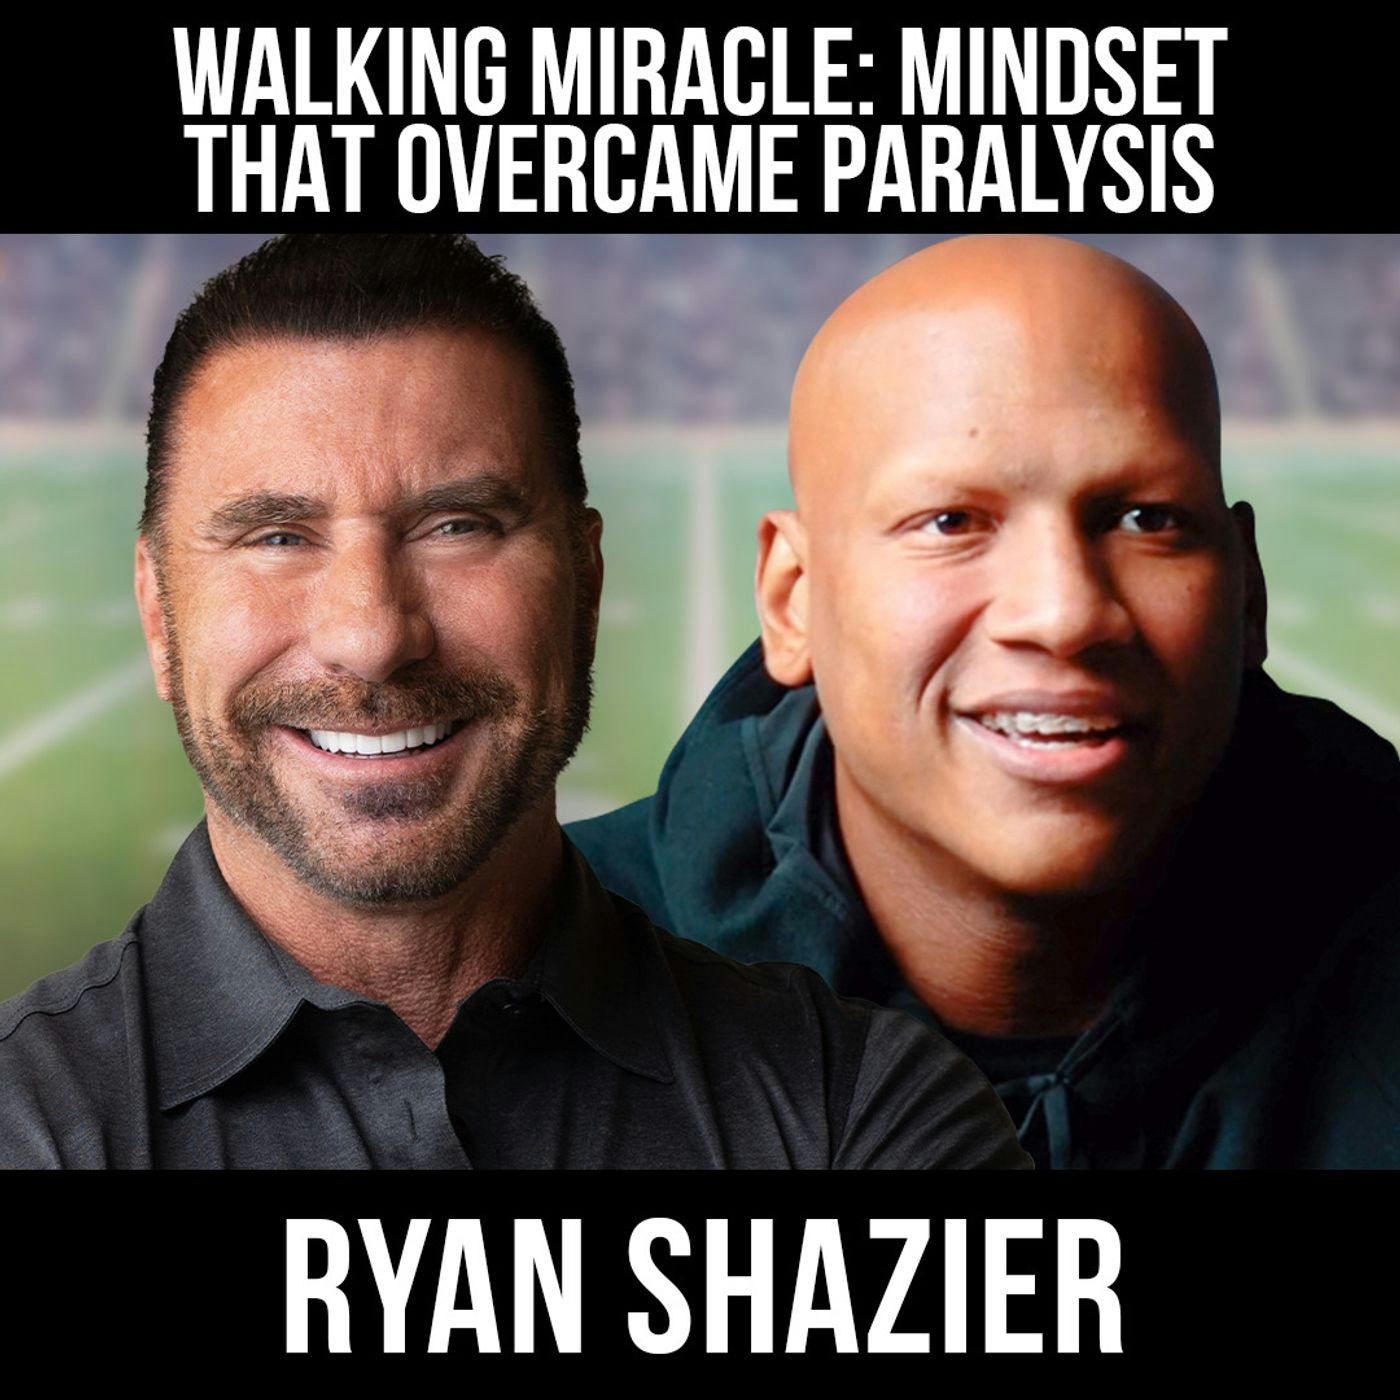 Walking Miracle: Mindset That Overcame Paralysis w/ Ryan Shazier